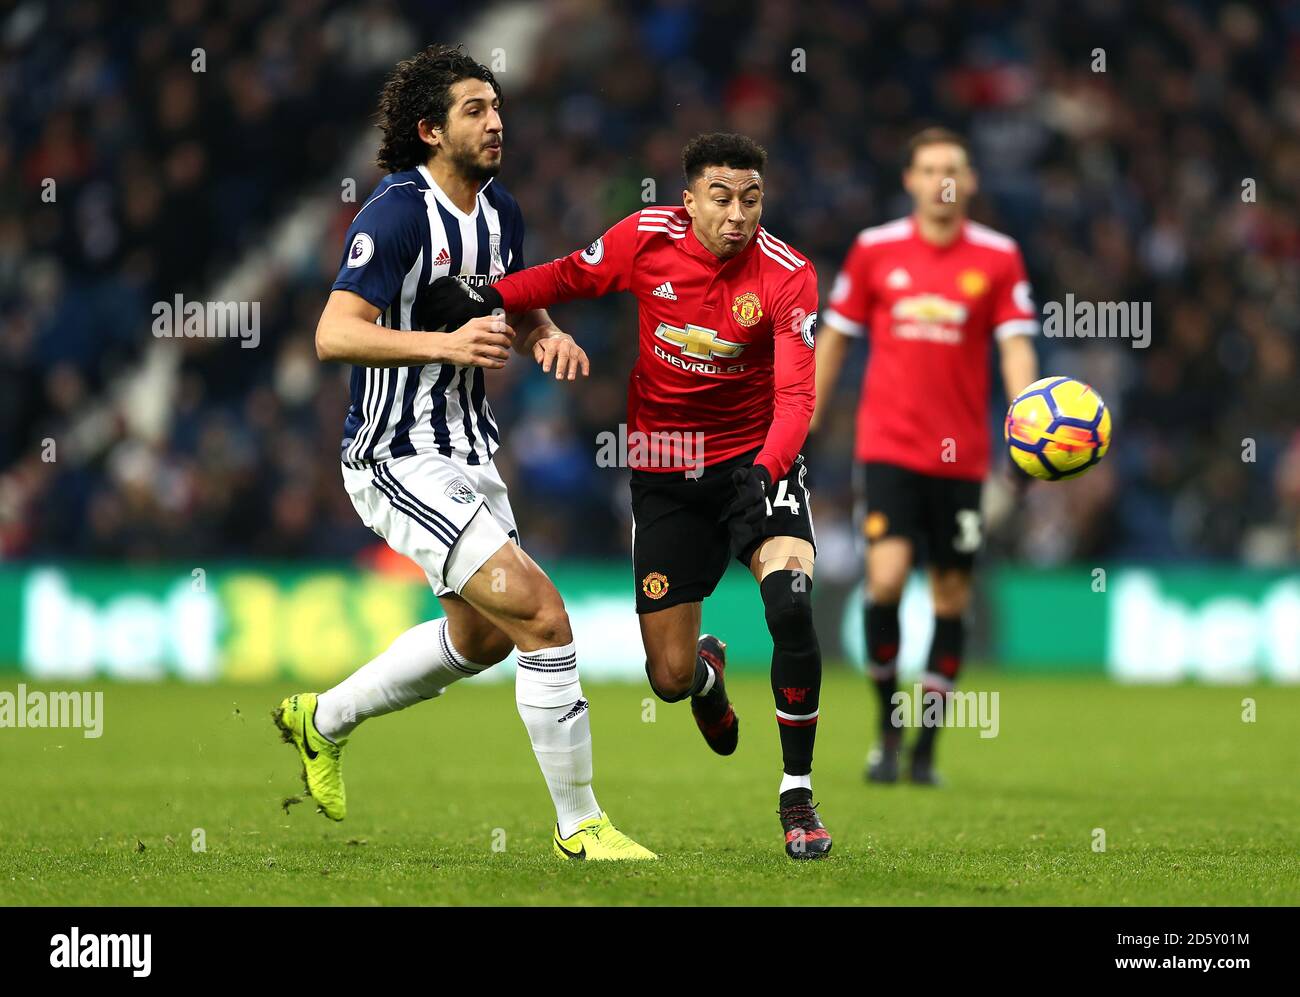 Manchester United's Jesse Lingard and West Bromwich Albion's Ahmed Hegazy battle for the ball Stock Photo